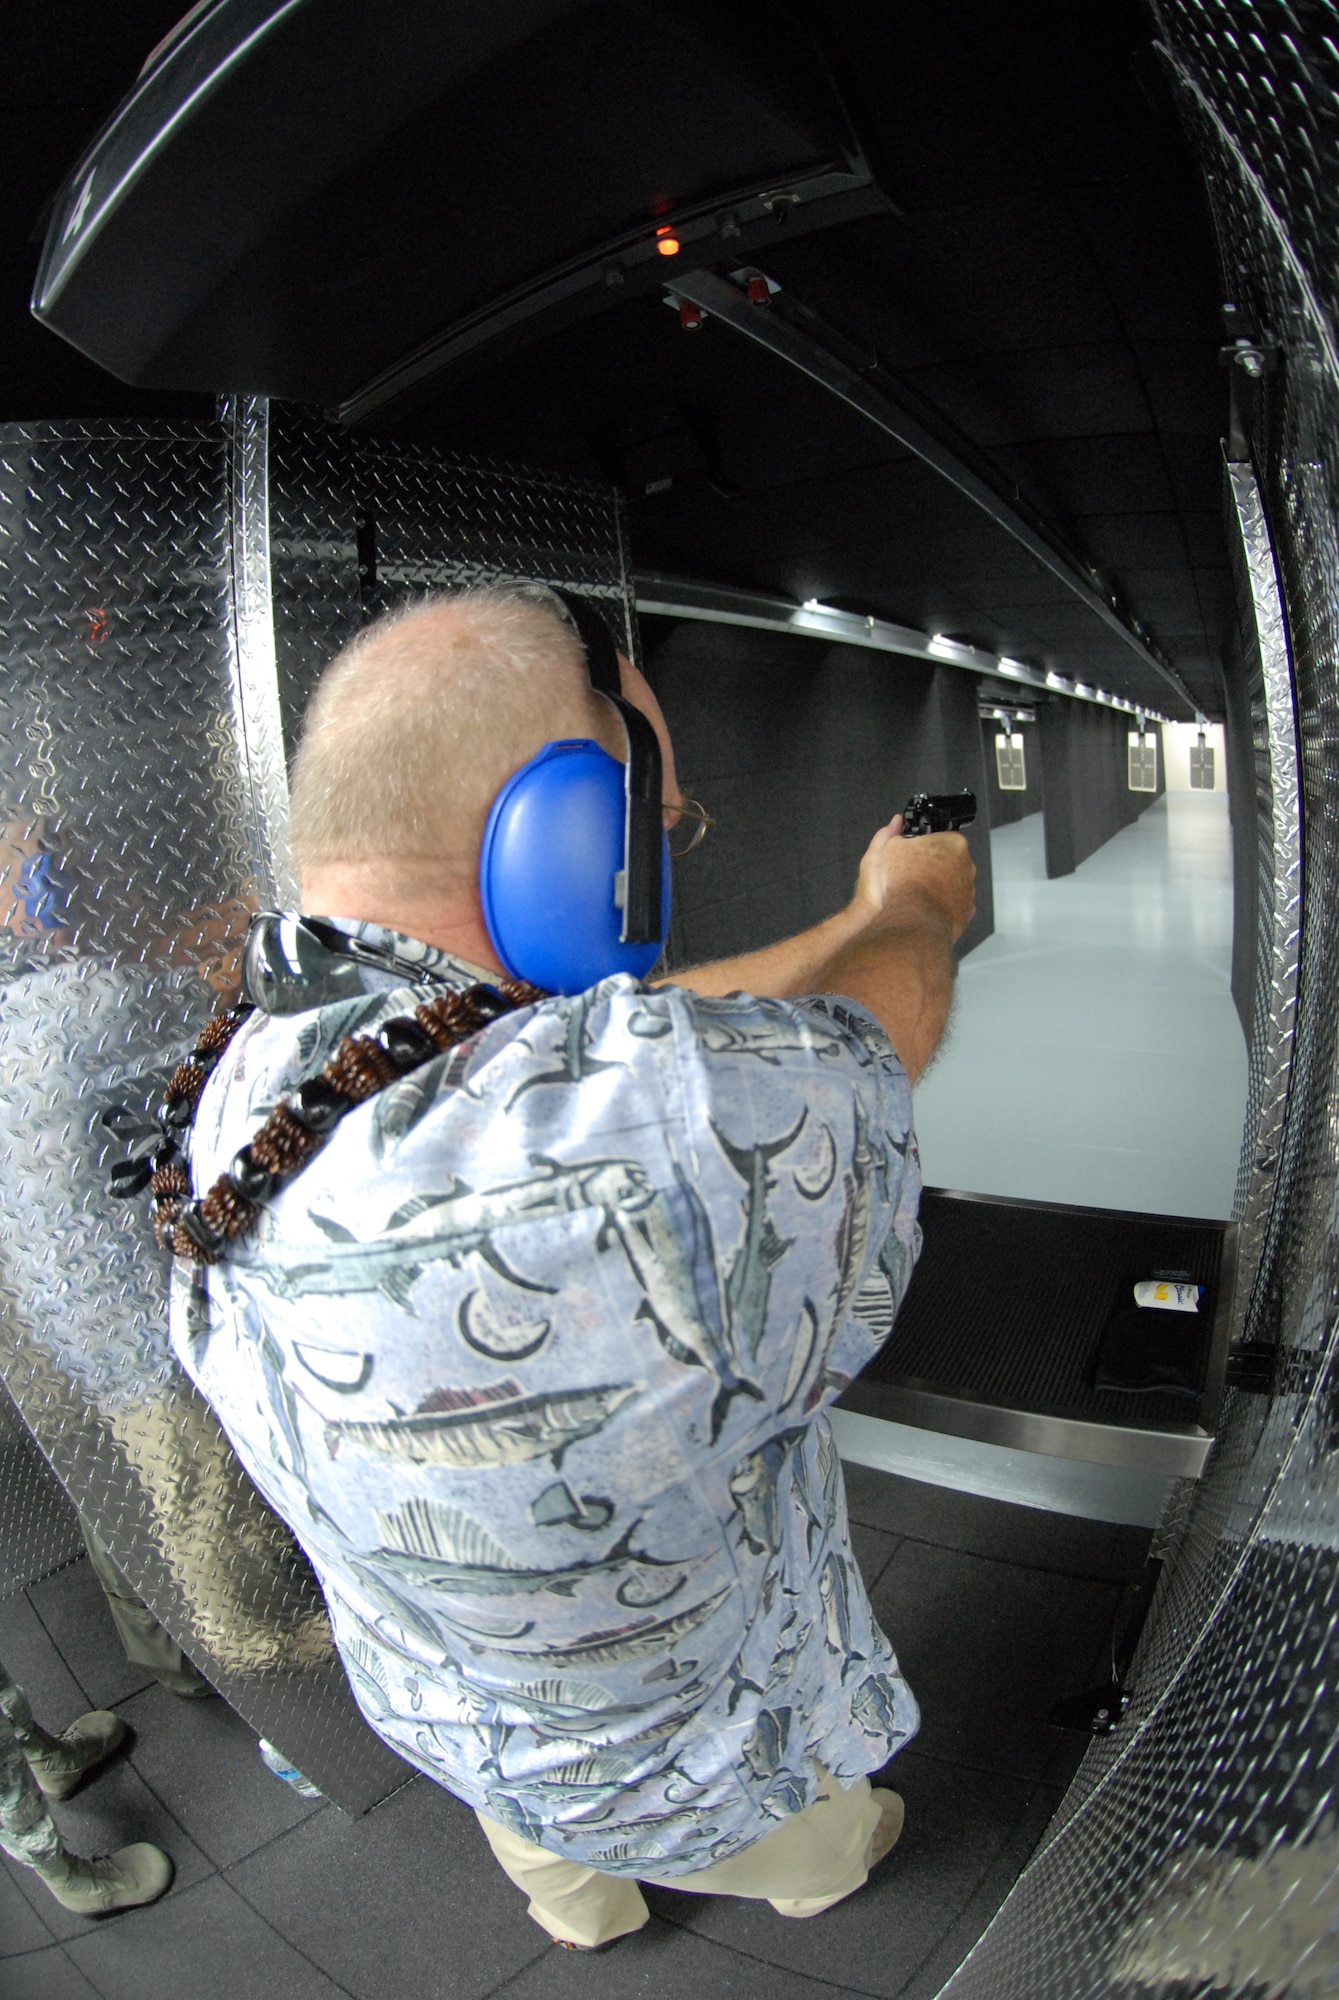 U.S. Air Force Brig. Gen. Stan Osserman (retired), former commander of the Hawaii Air National Guard, aims down range after the blessing of the 154th Security Force Squadron Indoor Firing Range at Joint Base Pearl Harbor-Hickam, Hawaii, Aug. 8, 2015. Osserman played an instrumental part in procuring the range for the Hawaii Air National Guard. The range is one of three deployed throughout the Air National Gaurd nationwide and features virtual simulations as part of the fire arms training. (U.S. Air National Guard photo by Airman 1st Class Robert Cabuco)
